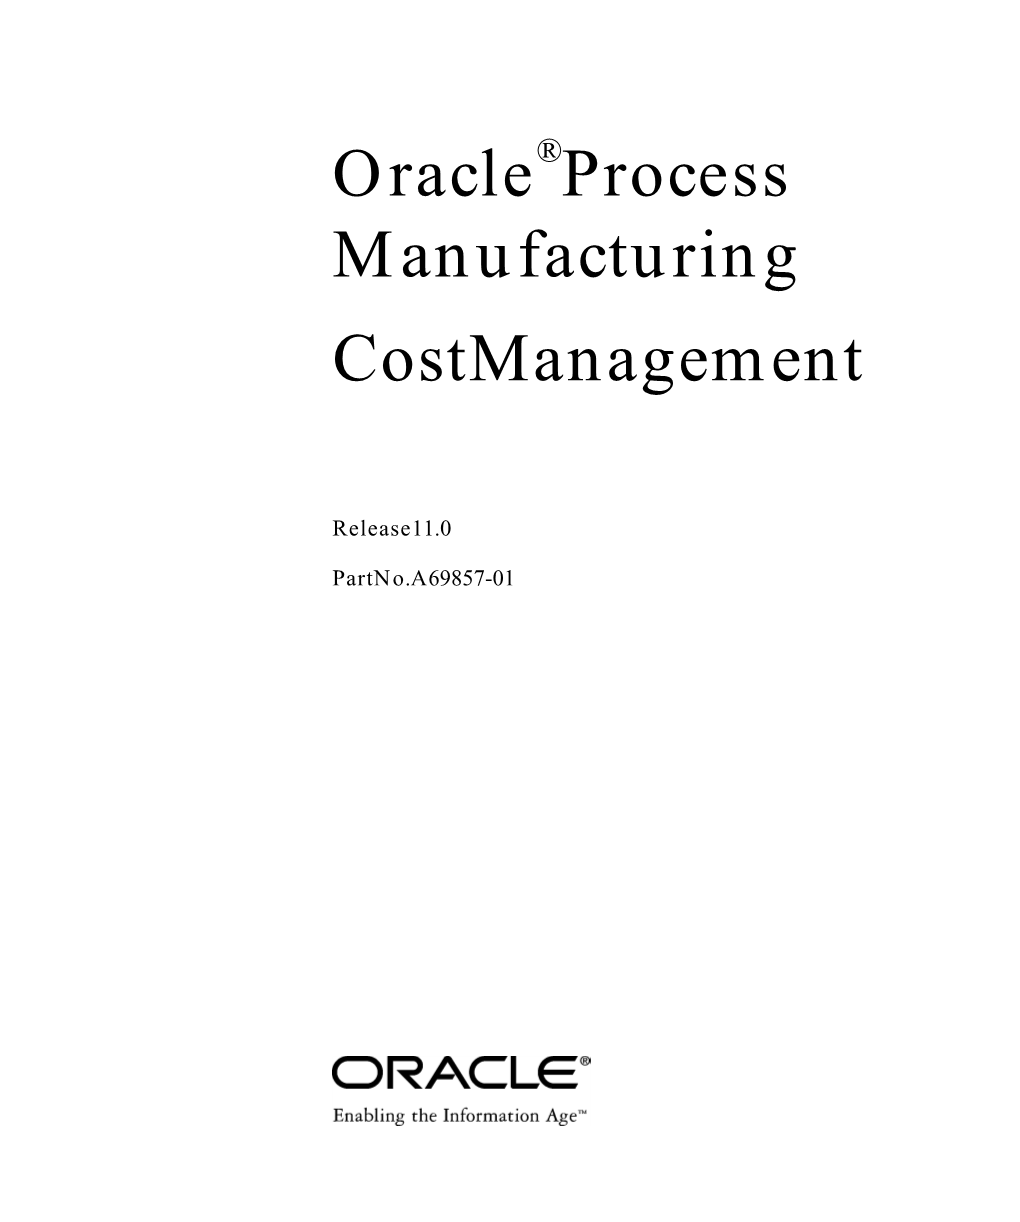 Process Manufacturing Costmanagement